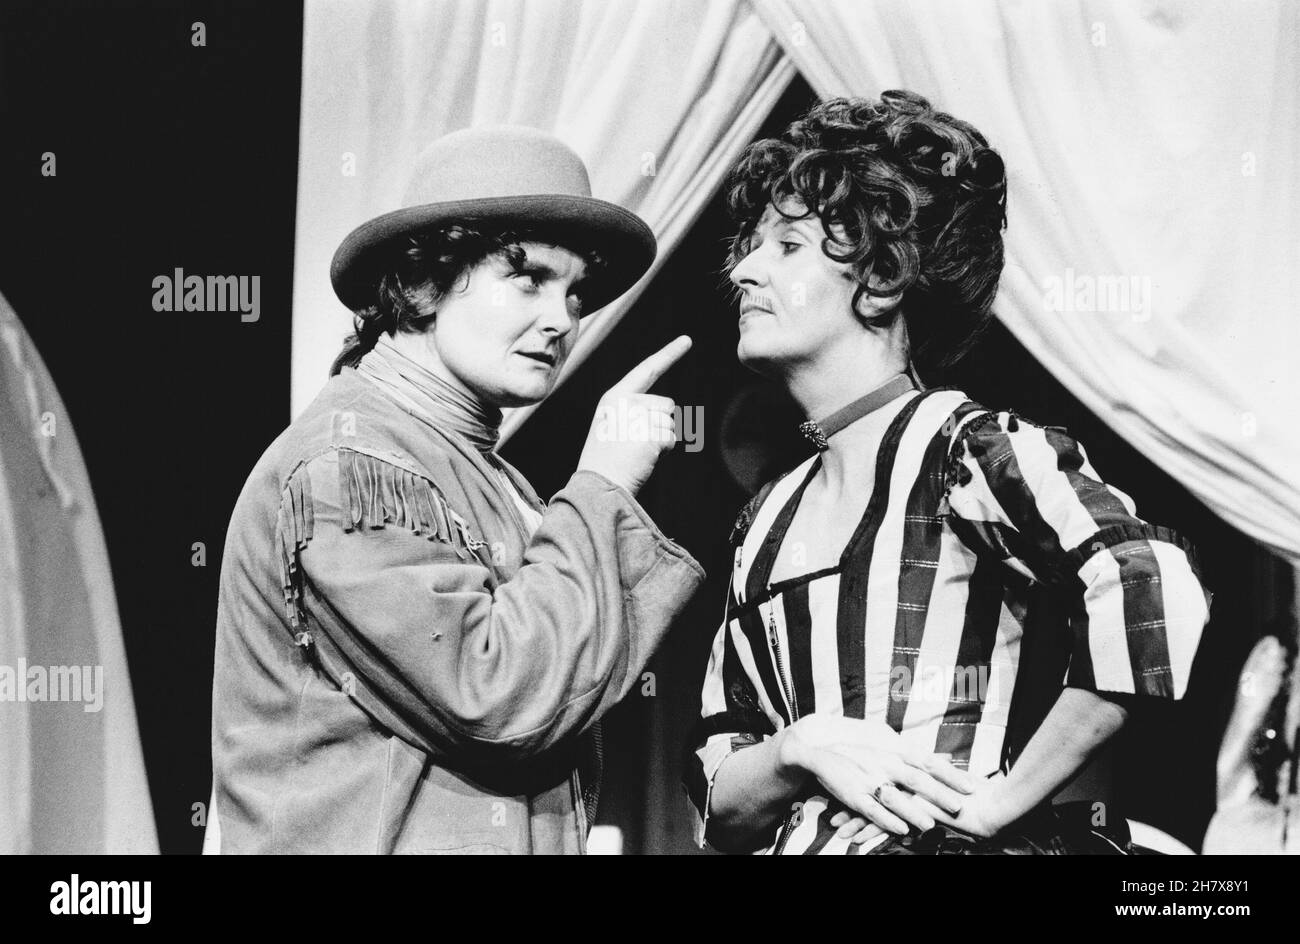 l-r: Gillian Hanna (Calamity Jane), Mary McCusker (Madame Moustache) in CALAMITY von Bryony Lavery im Tricycle Theatre, London NW6 25/01/1984 präsentiert von Monstrous Regiment Design: Andrea Montag Beleuchtung: Veronica Wood Regie: Nona Shepphard Stockfoto